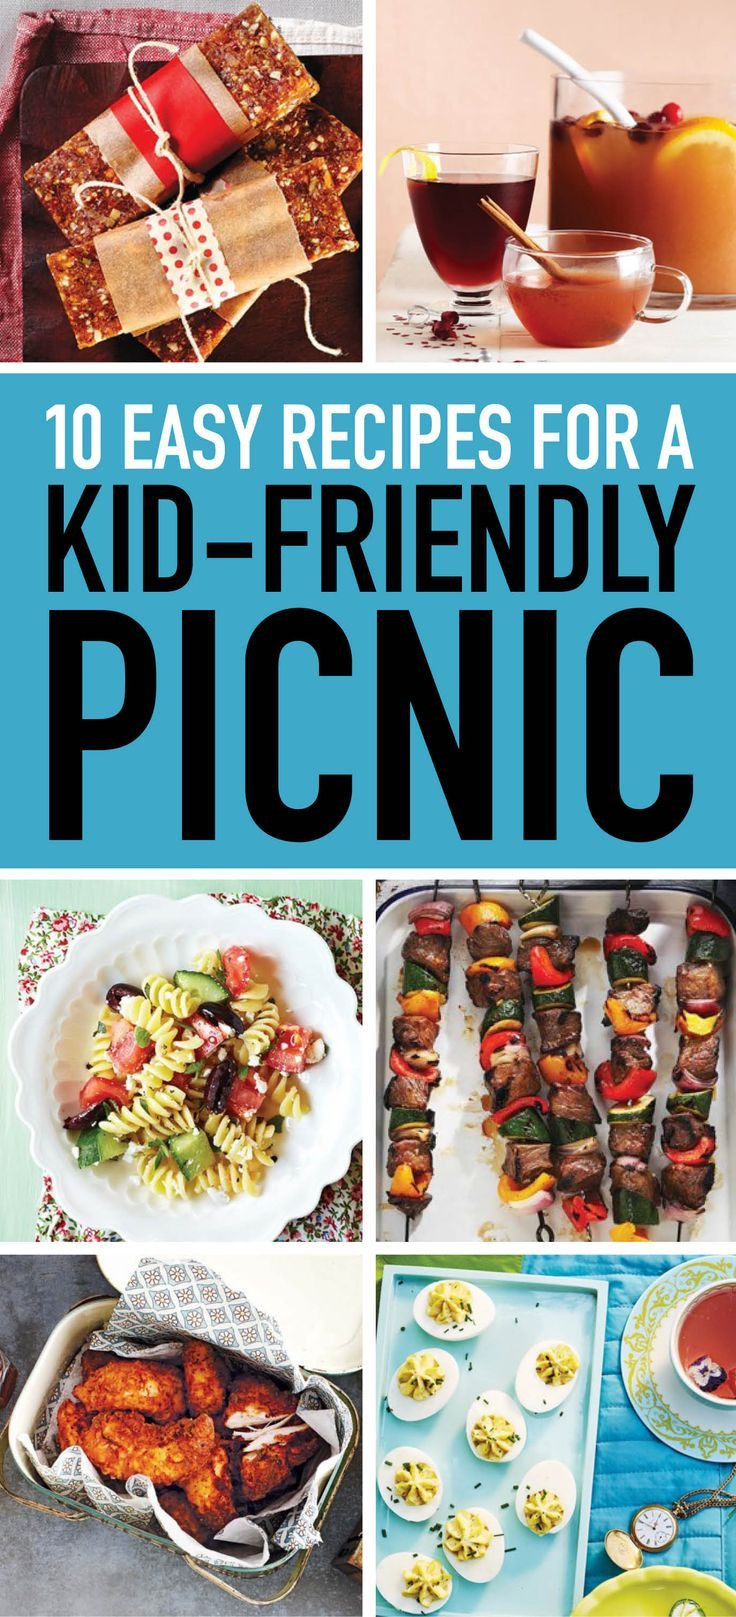 Beach Party Potluck Food Ideas
 17 quick and easy picnic recipes your kids will love